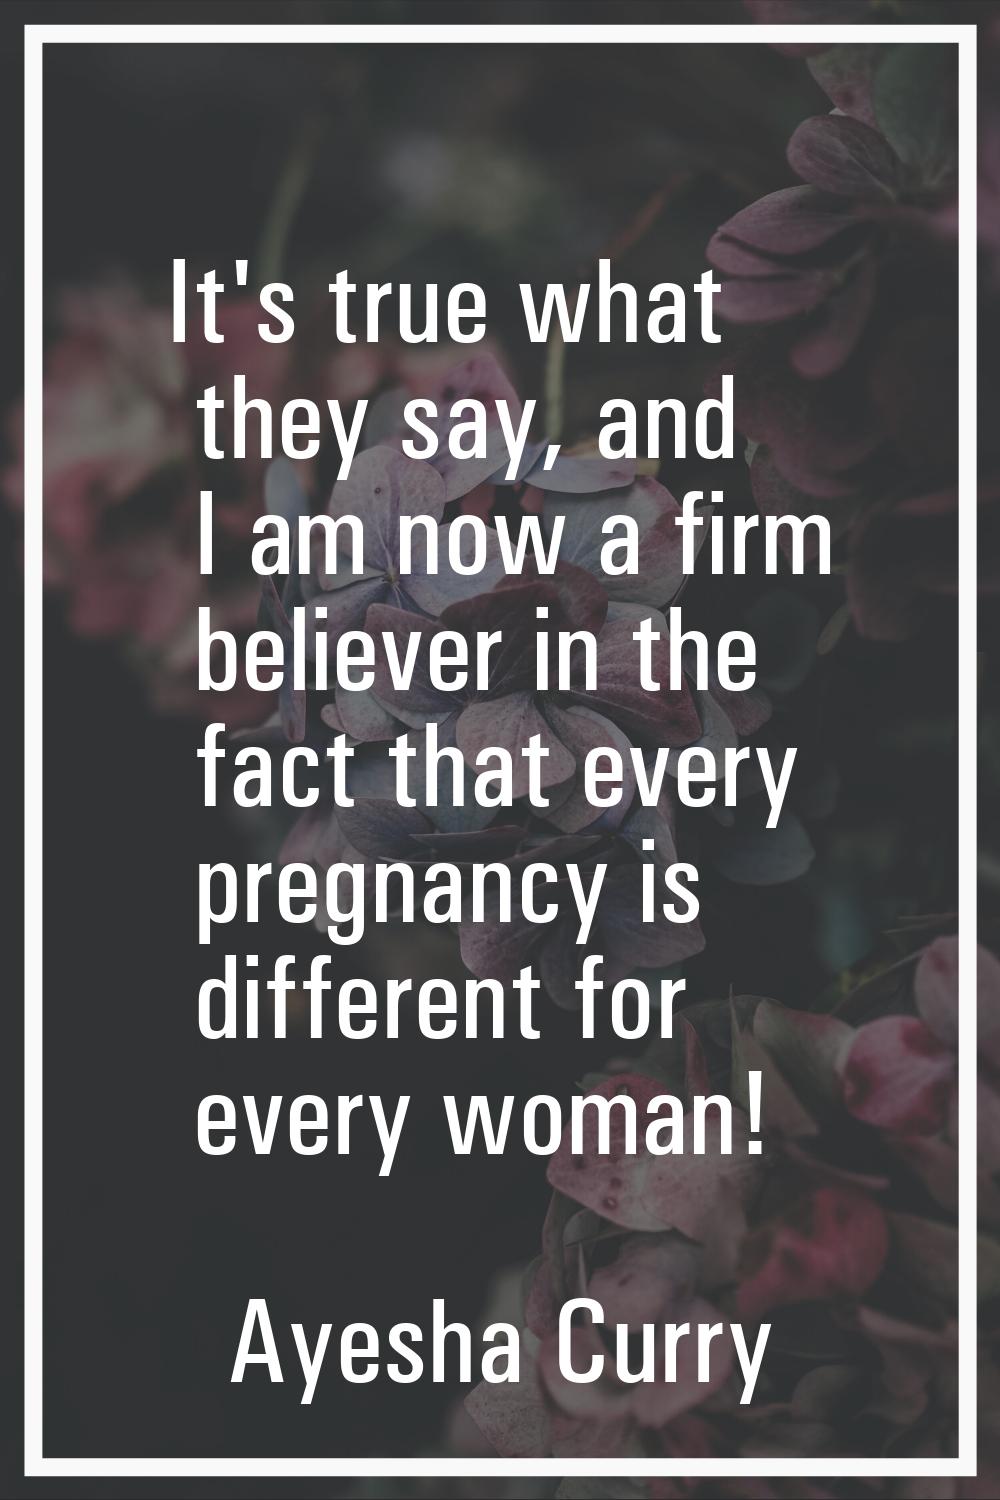 It's true what they say, and I am now a firm believer in the fact that every pregnancy is different